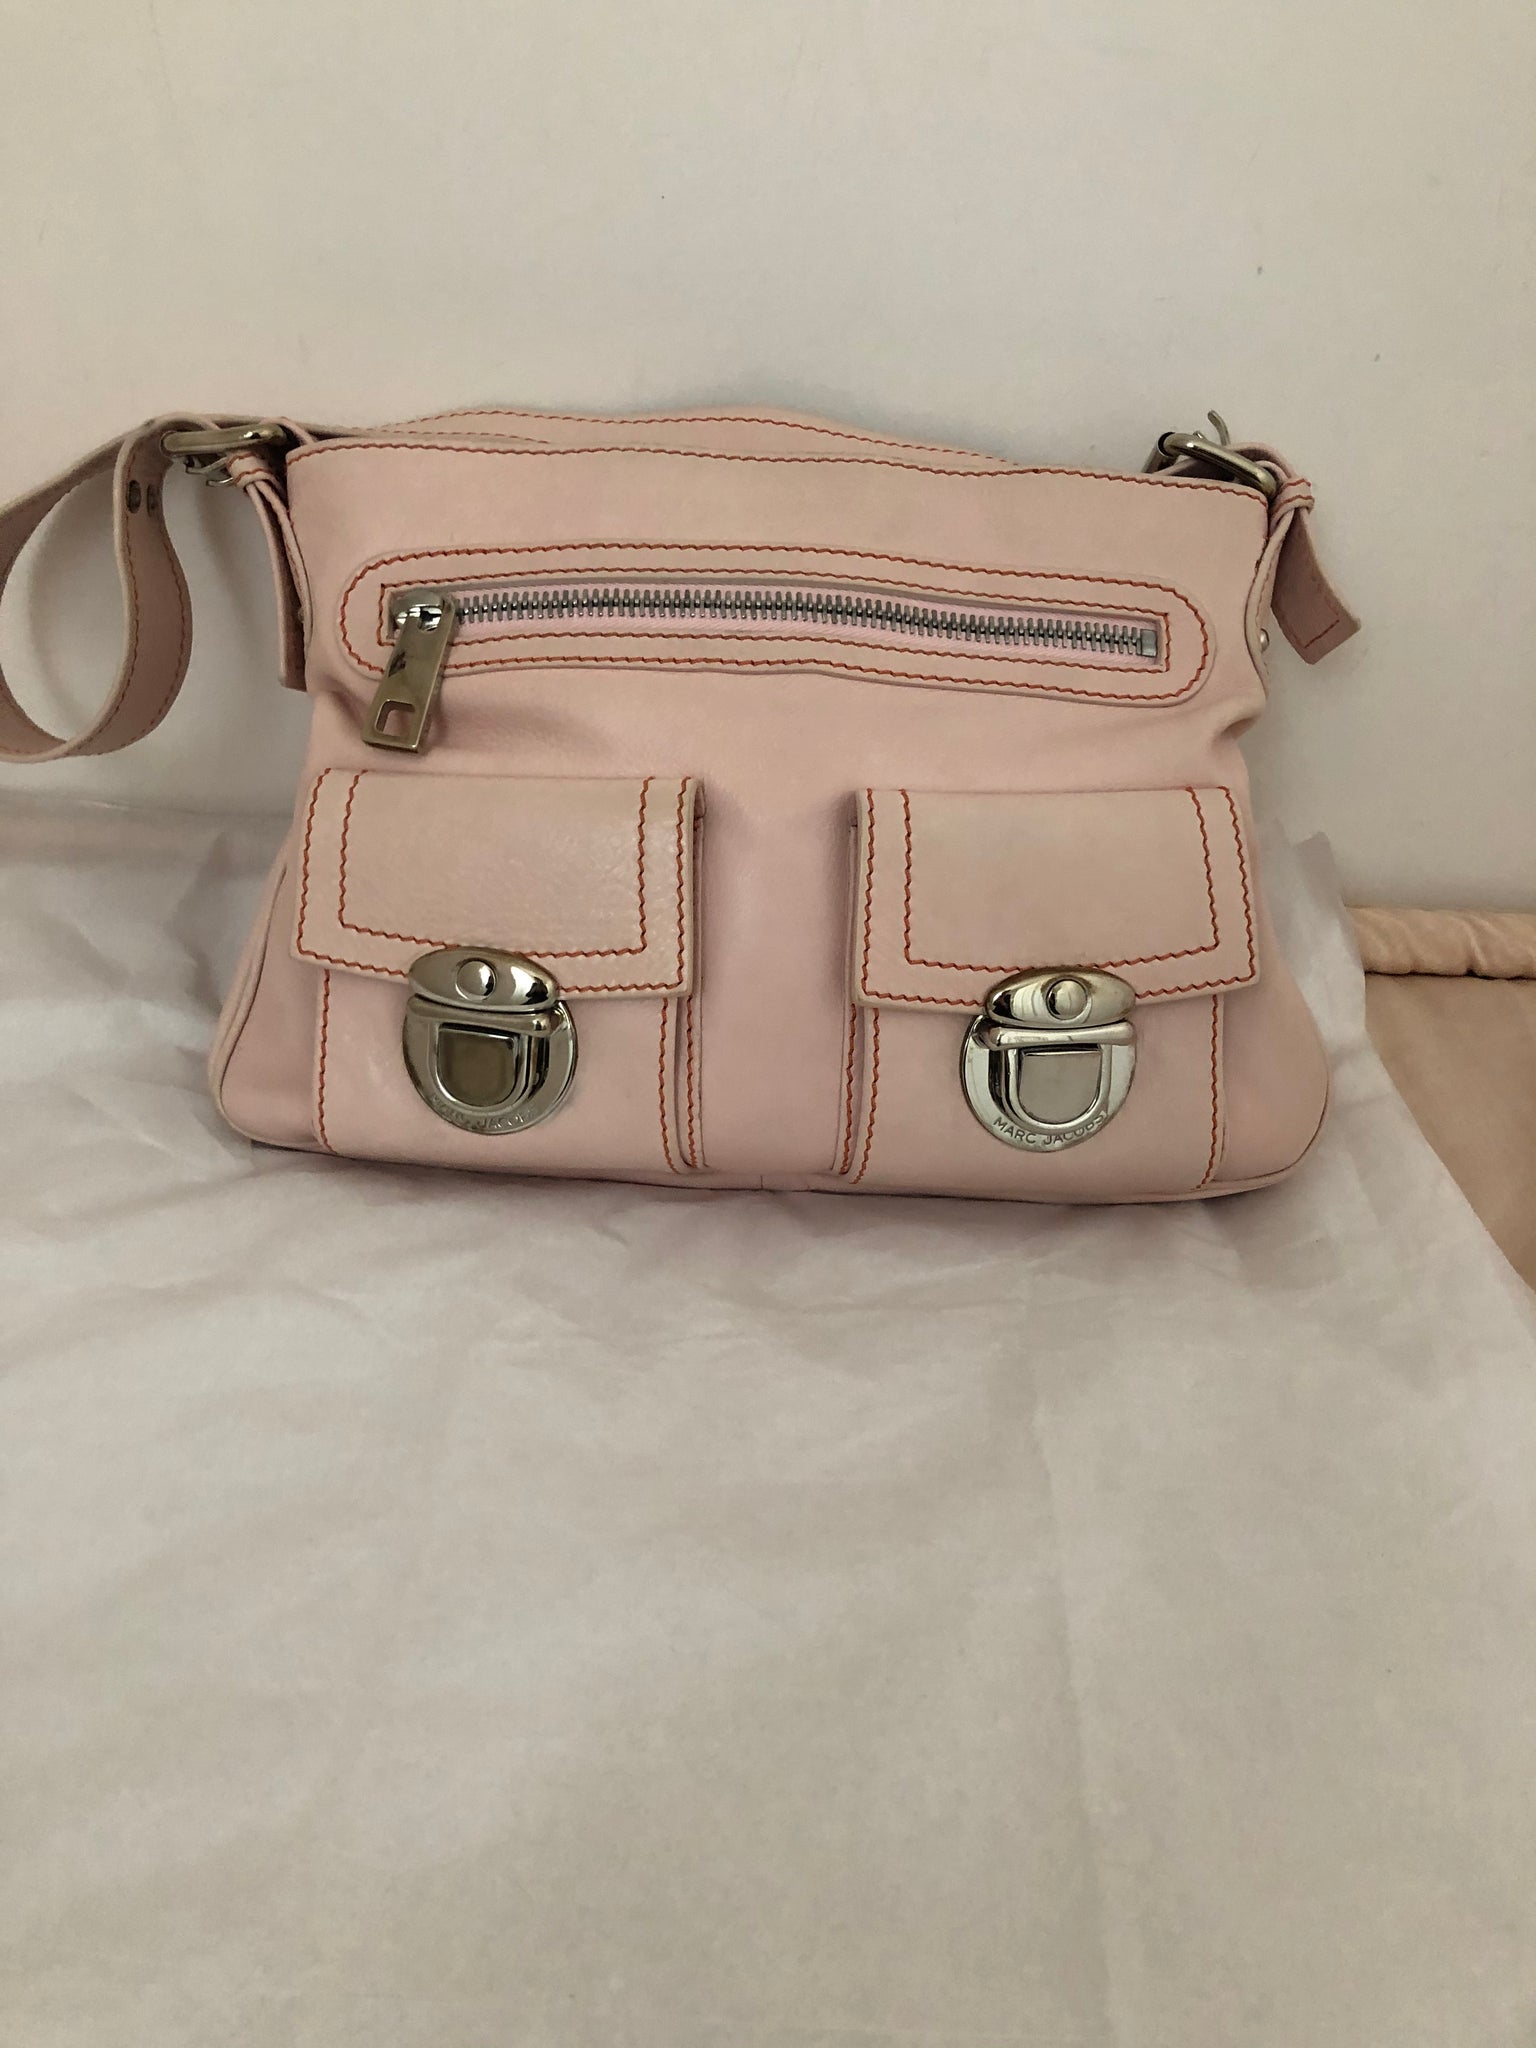 Marc Jacobs Blake Handbag Made in Italy – Thrill of the Find